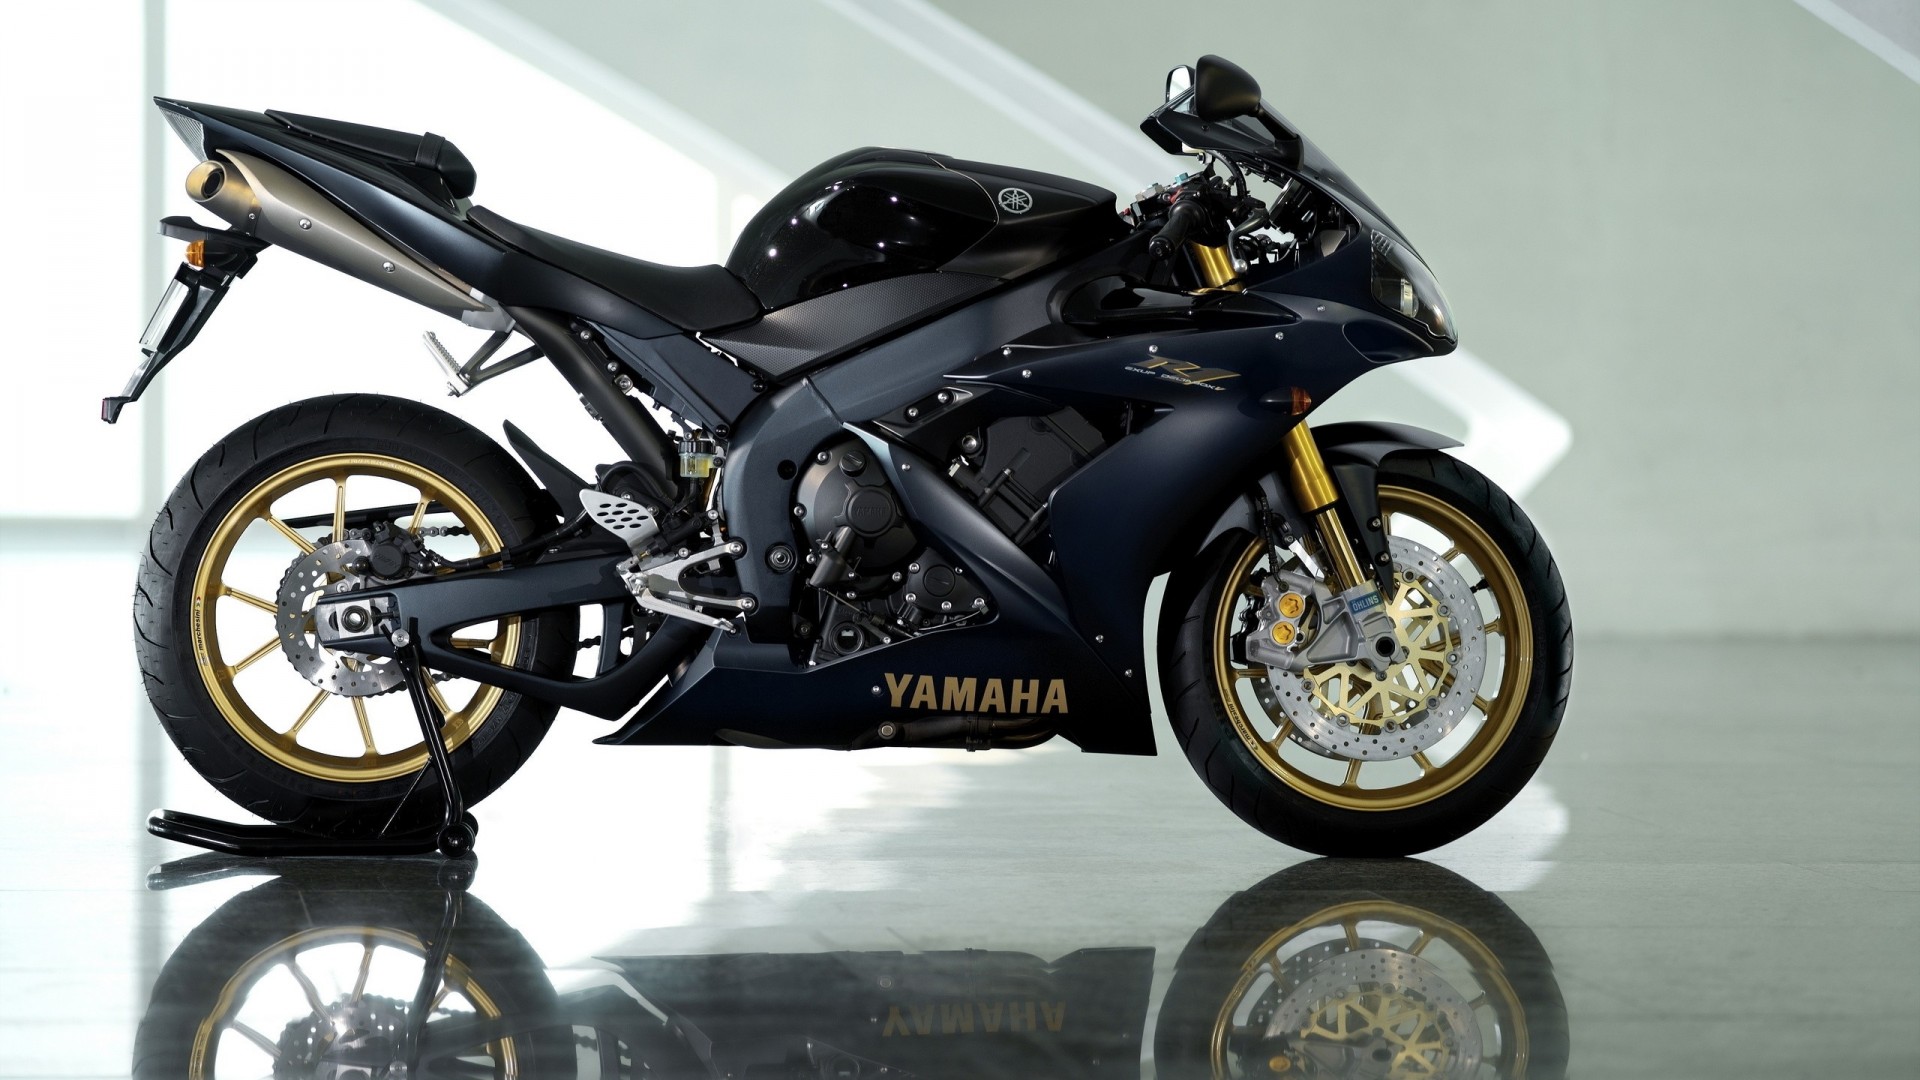 Yamaha R15 Wallpapers 1996601 Hd Wallpaper Backgrounds Download